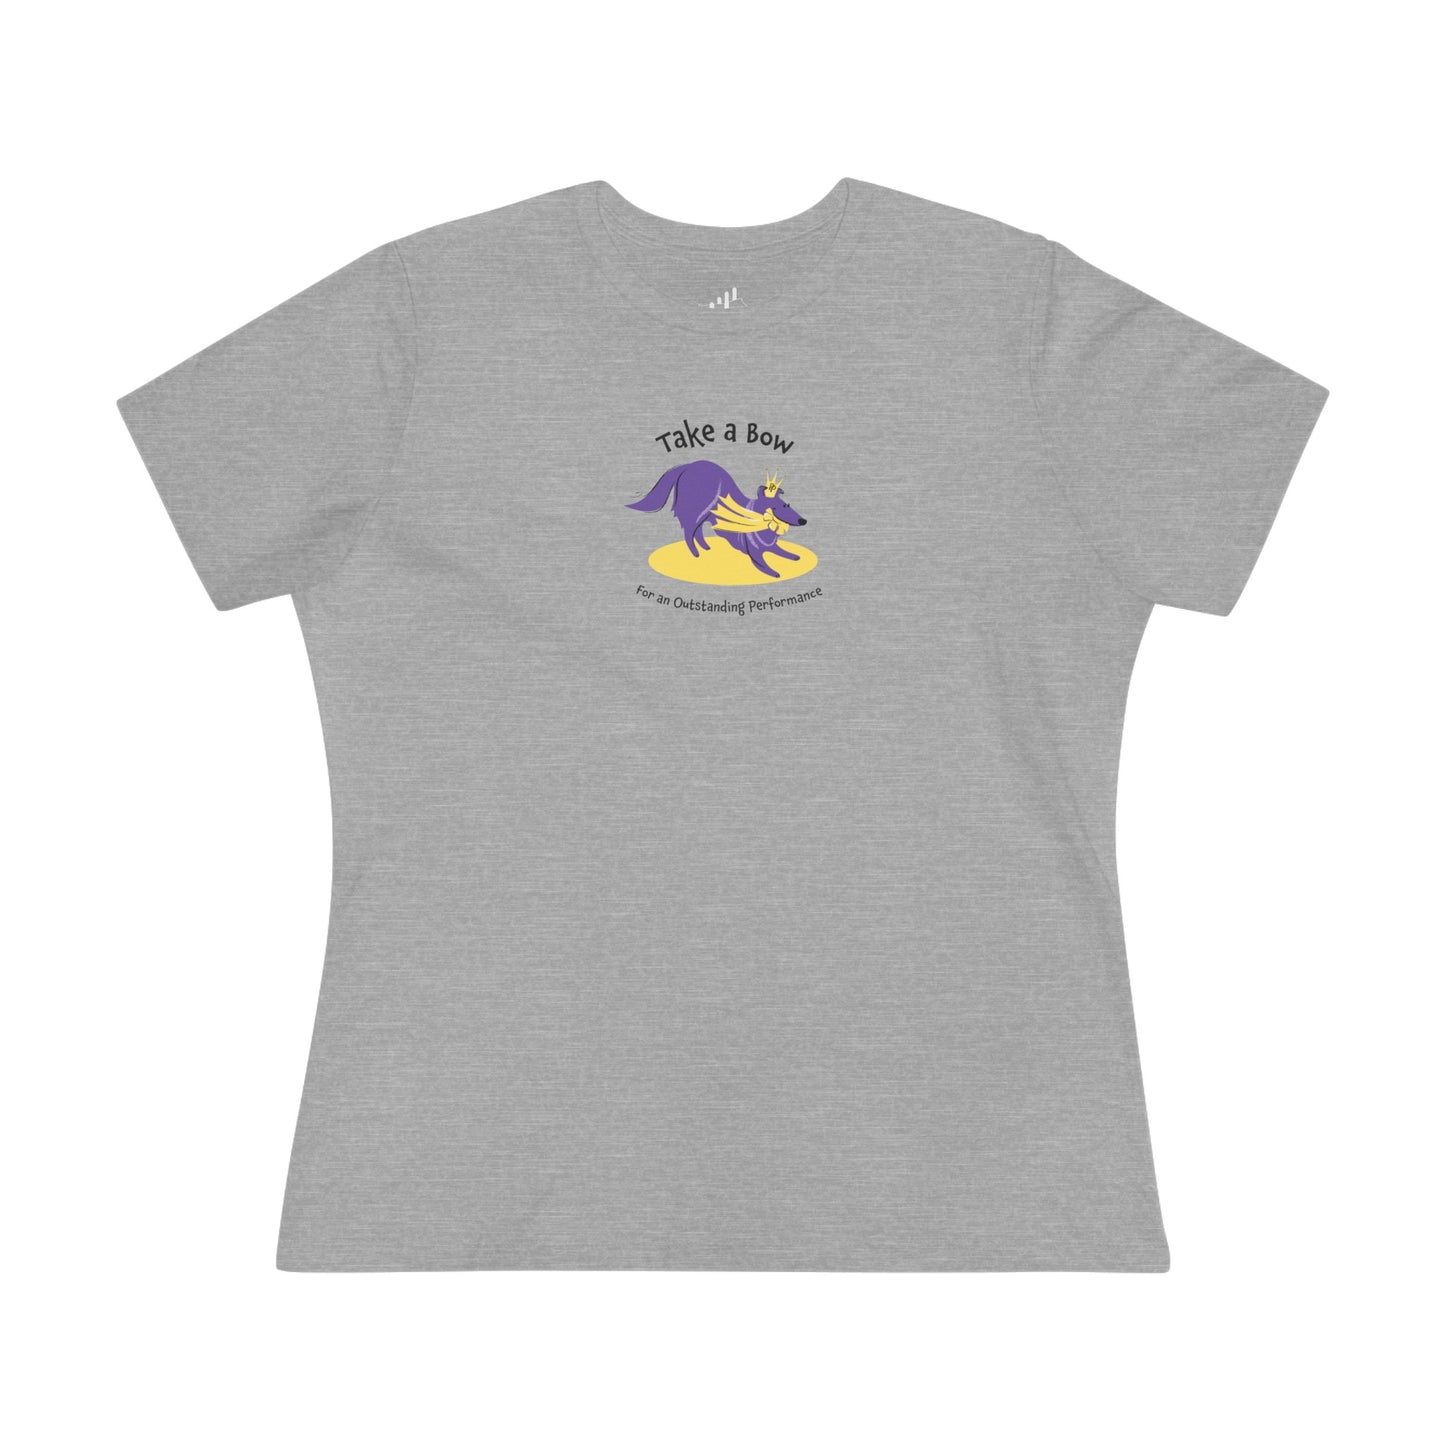 Great Performance Women's Softstyle Tee